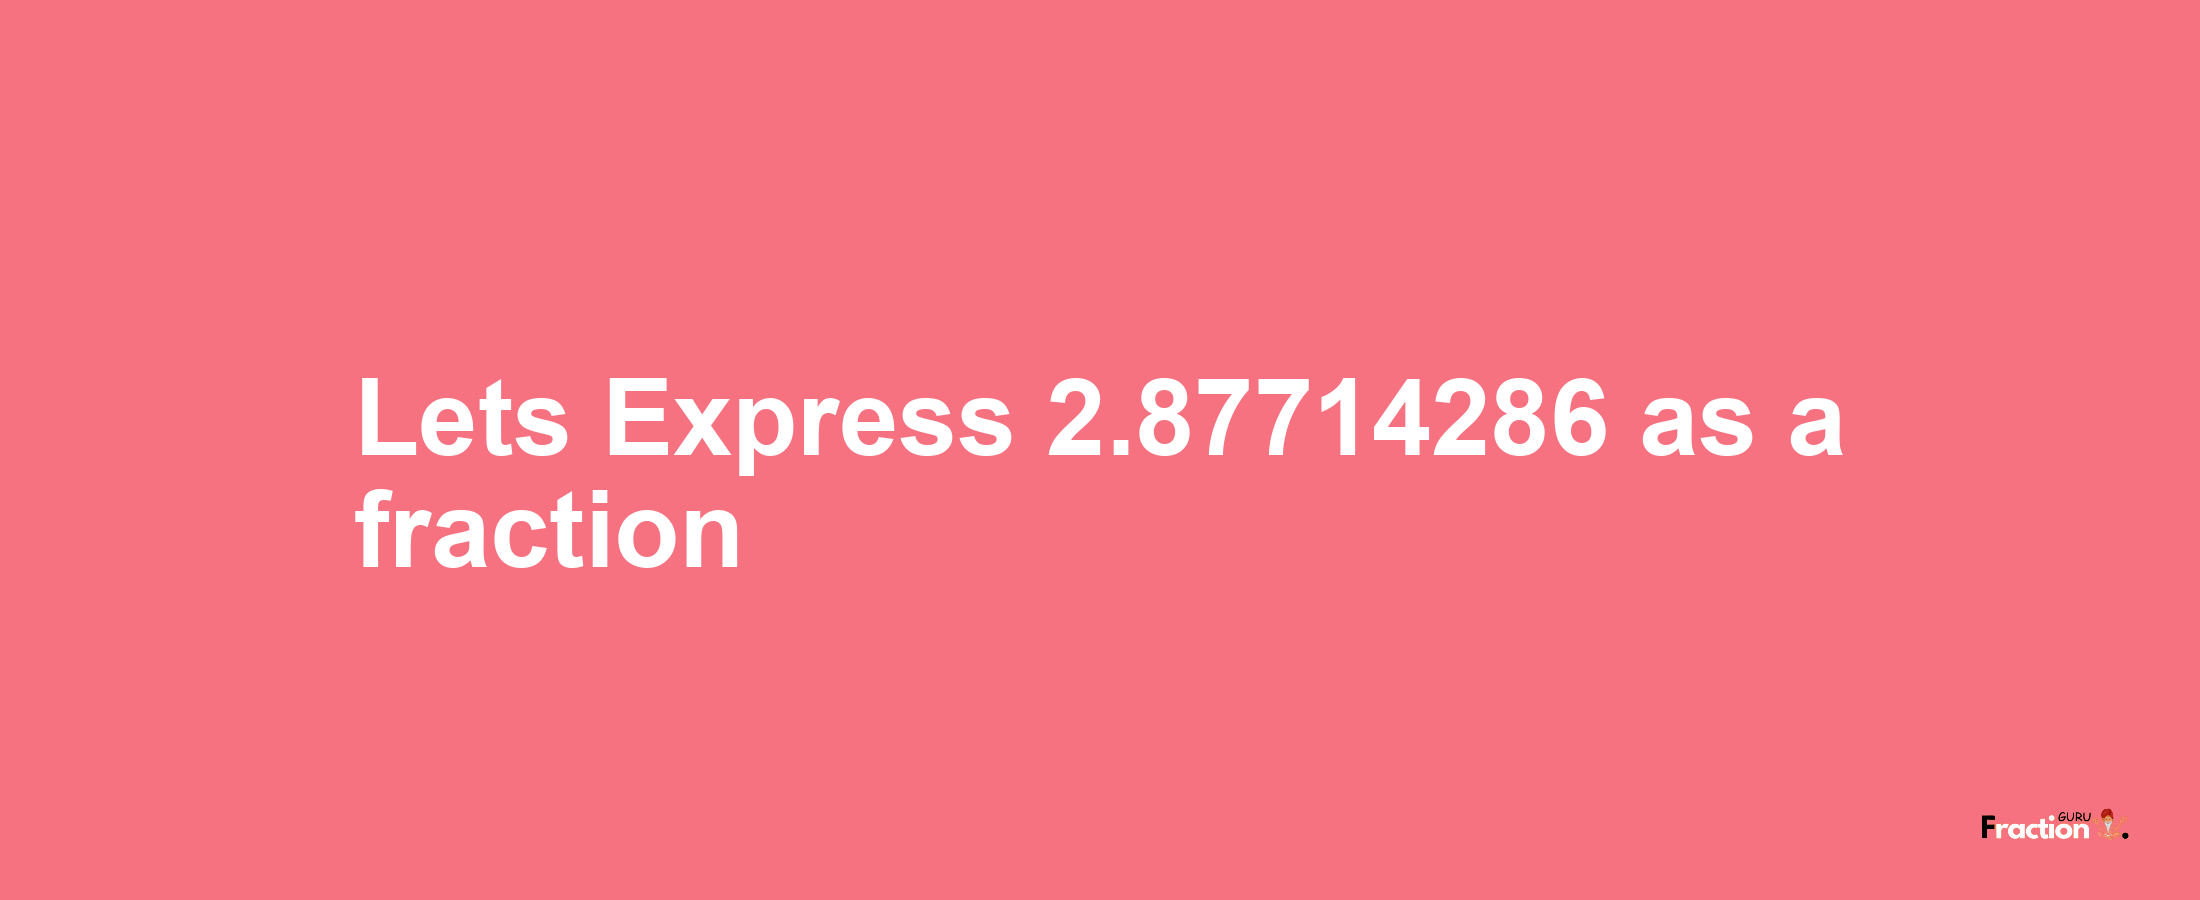 Lets Express 2.87714286 as afraction